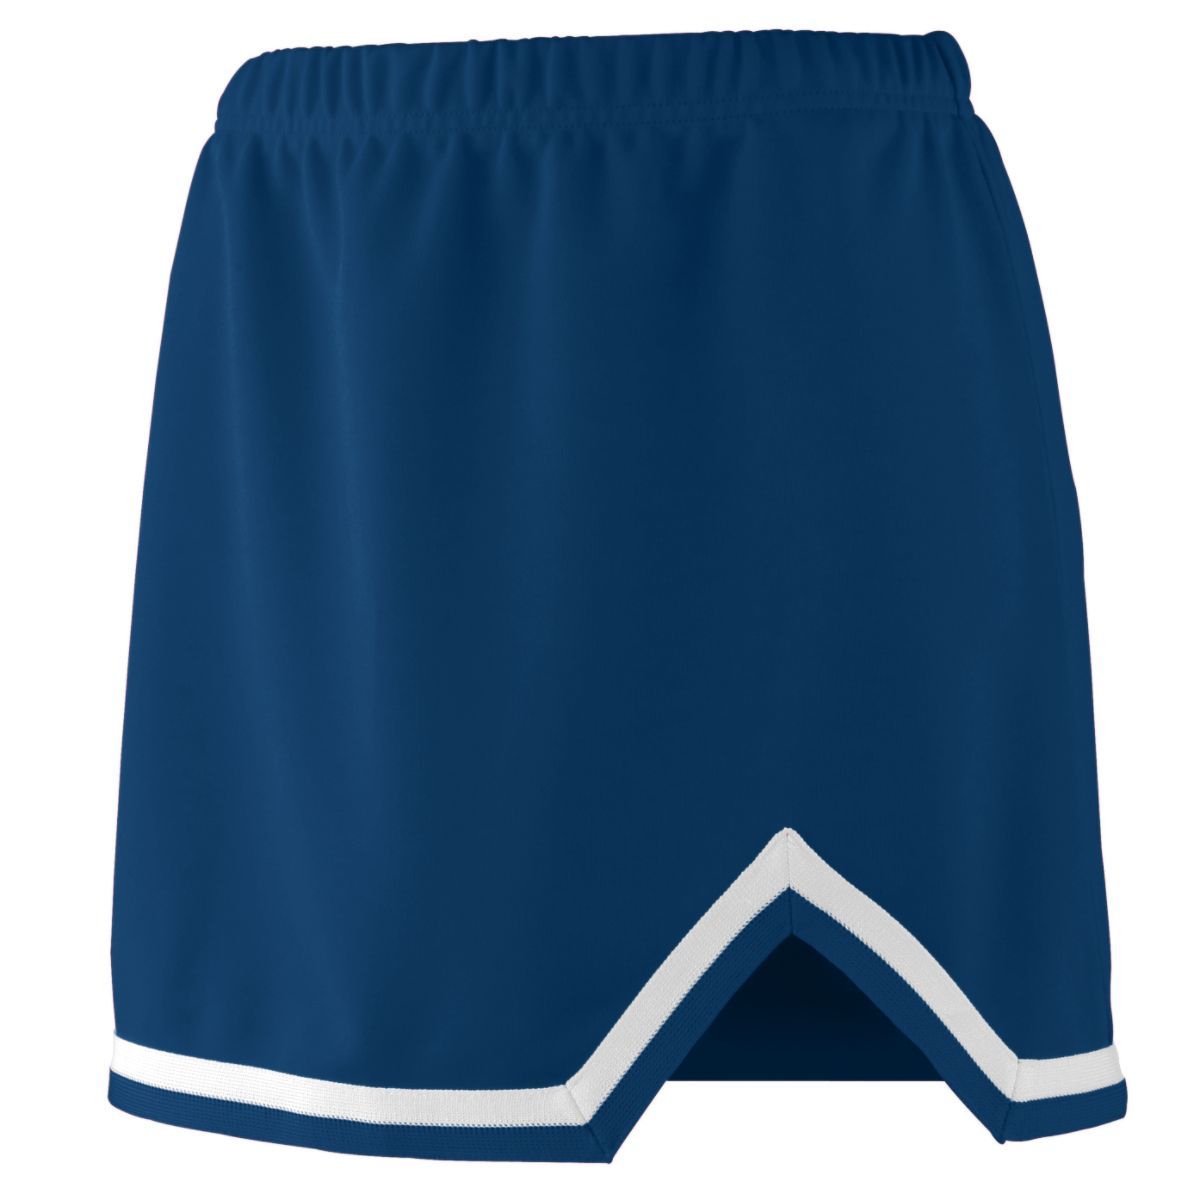 Augusta Sportswear Ladies Energy Skirt in Navy/White  -Part of the Ladies, Augusta-Products, Cheer product lines at KanaleyCreations.com